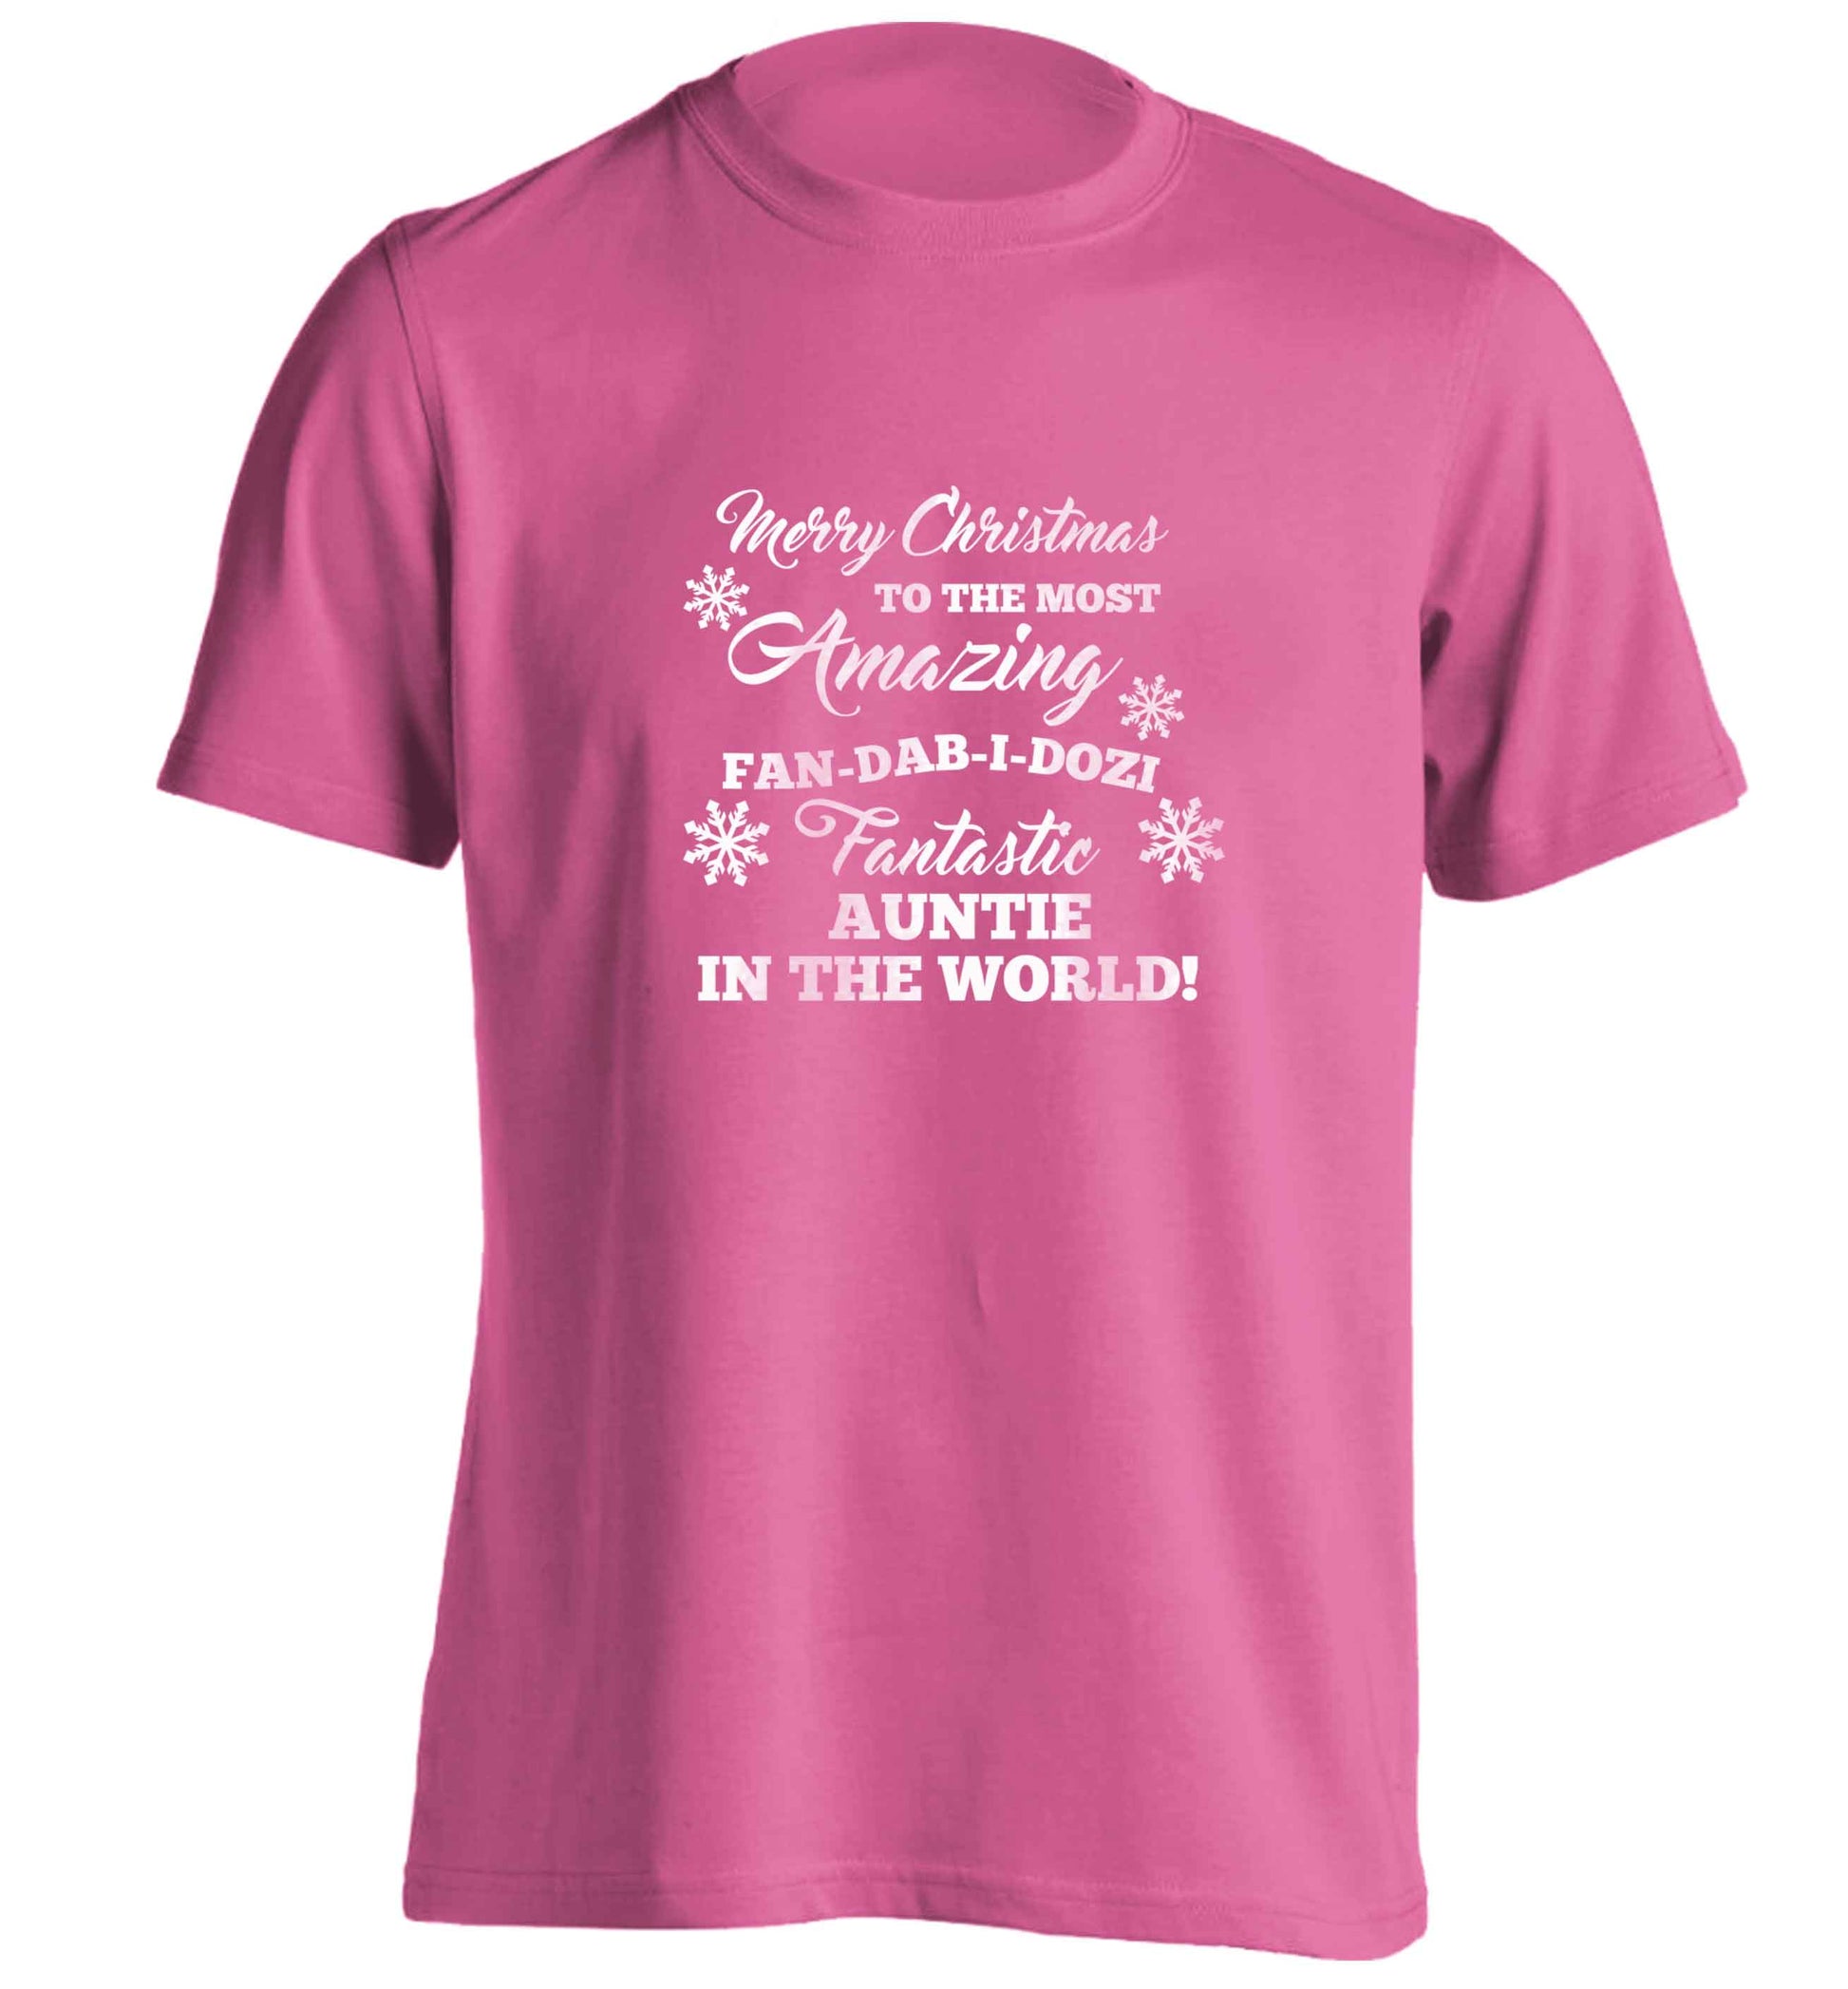 Merry Christmas to the most amazing fan-dab-i-dozi fantasic Auntie in the world adults unisex pink Tshirt 2XL